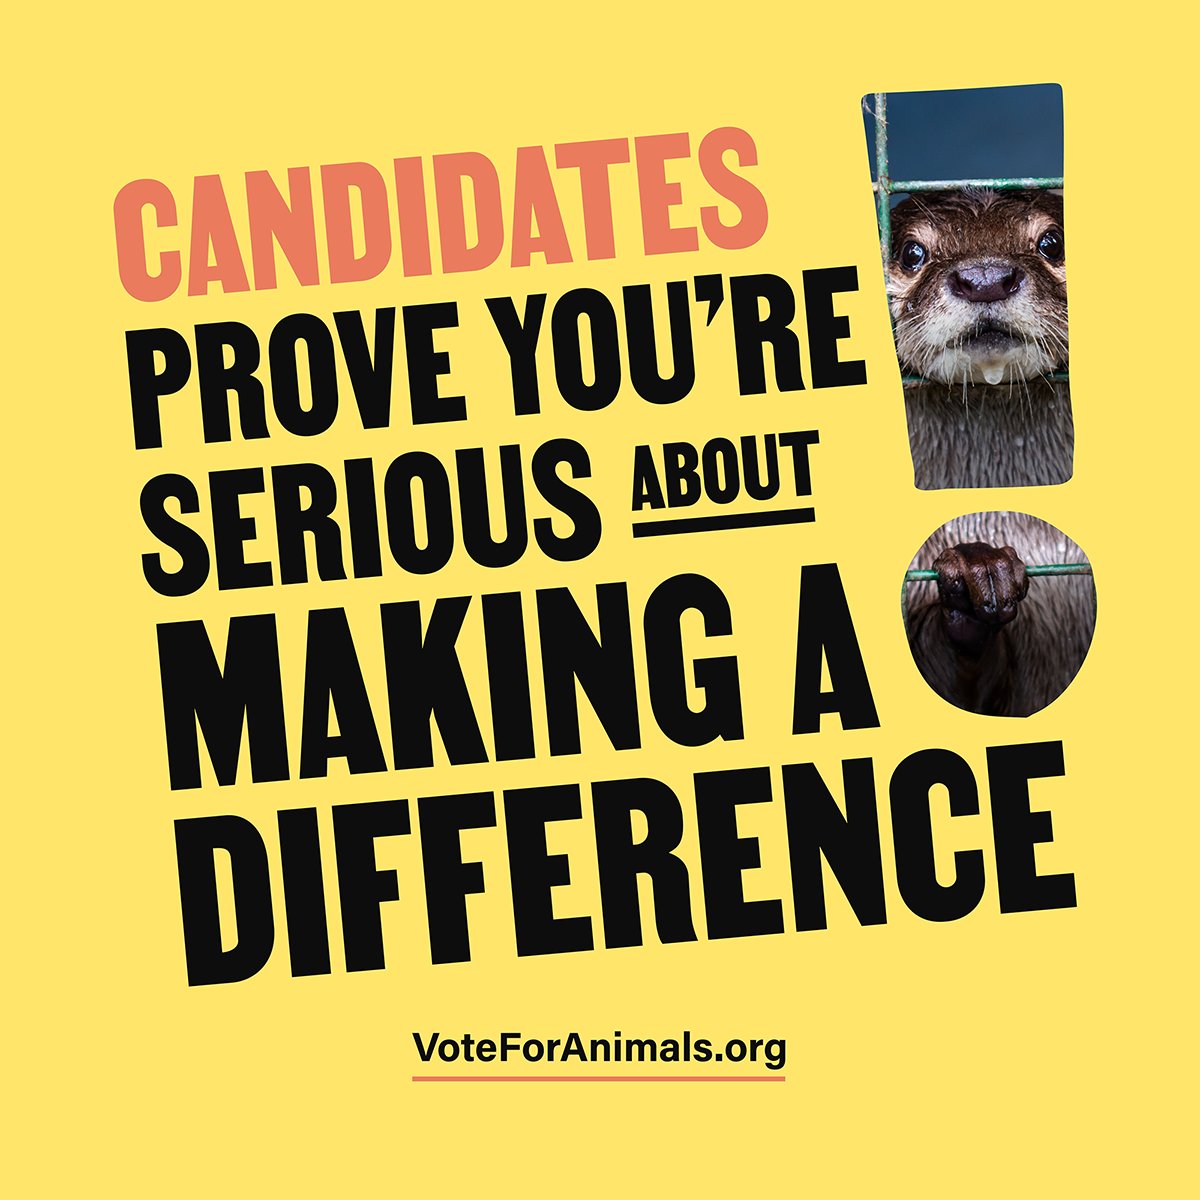 If it is true that politicians represent the interests of citizens, then animal welfare should be a priority.💪

I am calling on lead candidates who have not signed the #VoteforAnimals pledge to do so and commit to making #animalWelfare a priority: voteforanimals.org